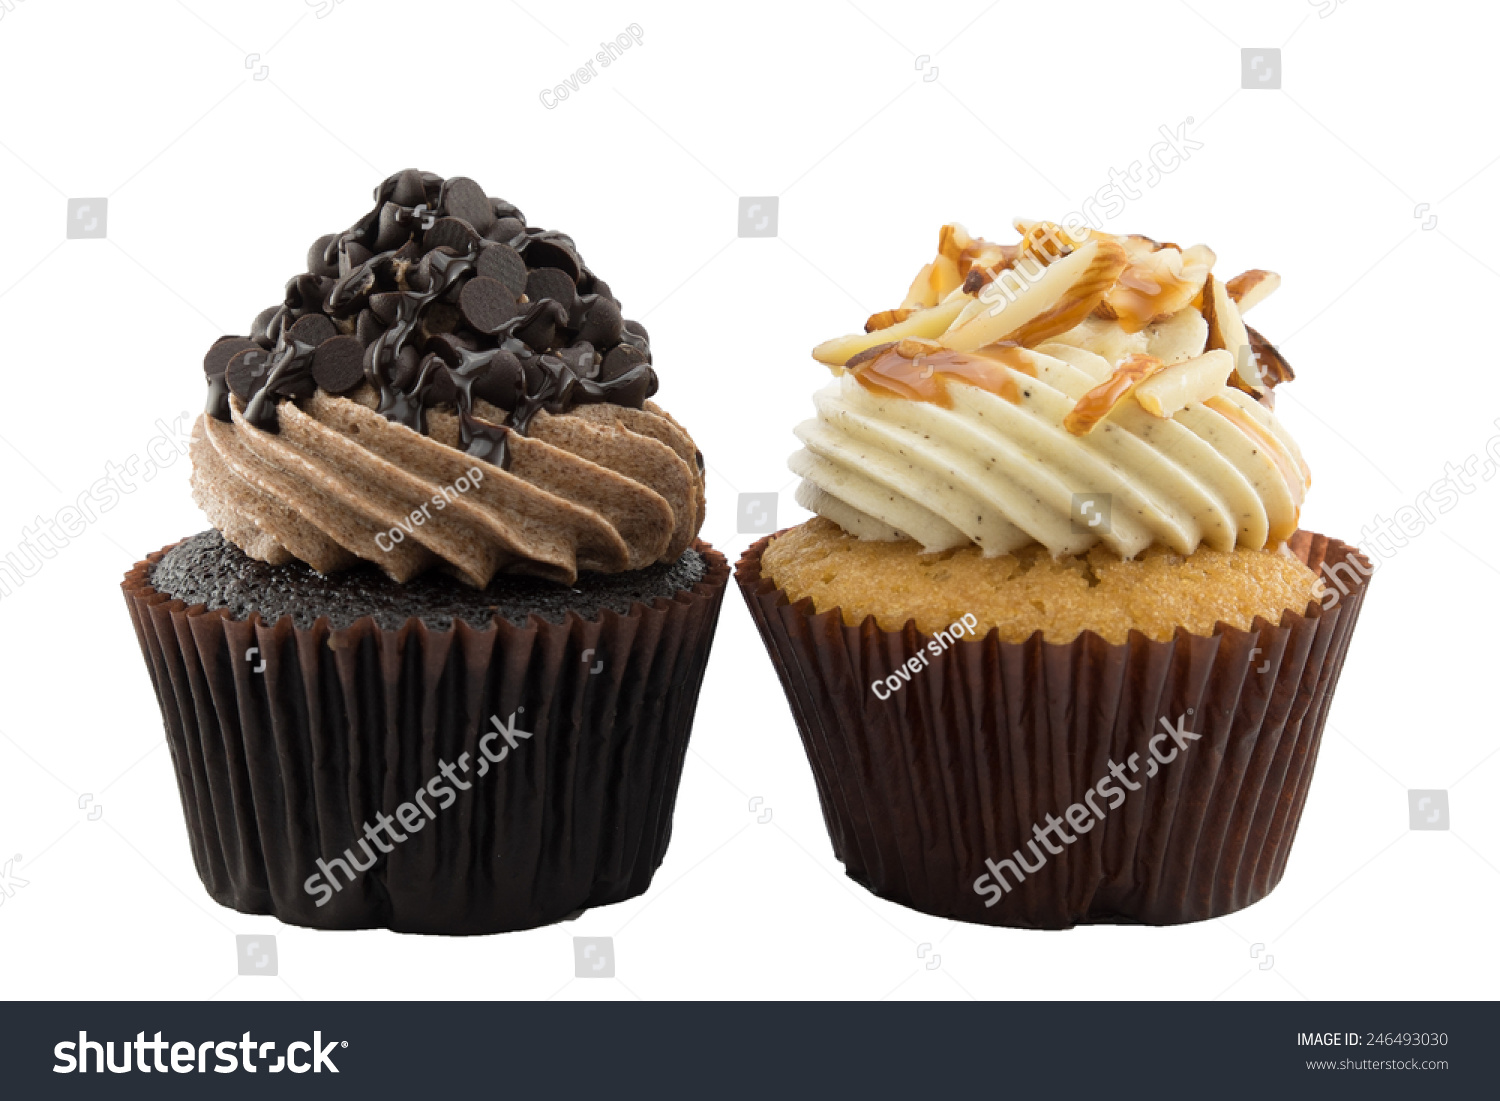 Dilicious chocolate and coffee caramel cupcake in isolated background. #246493030